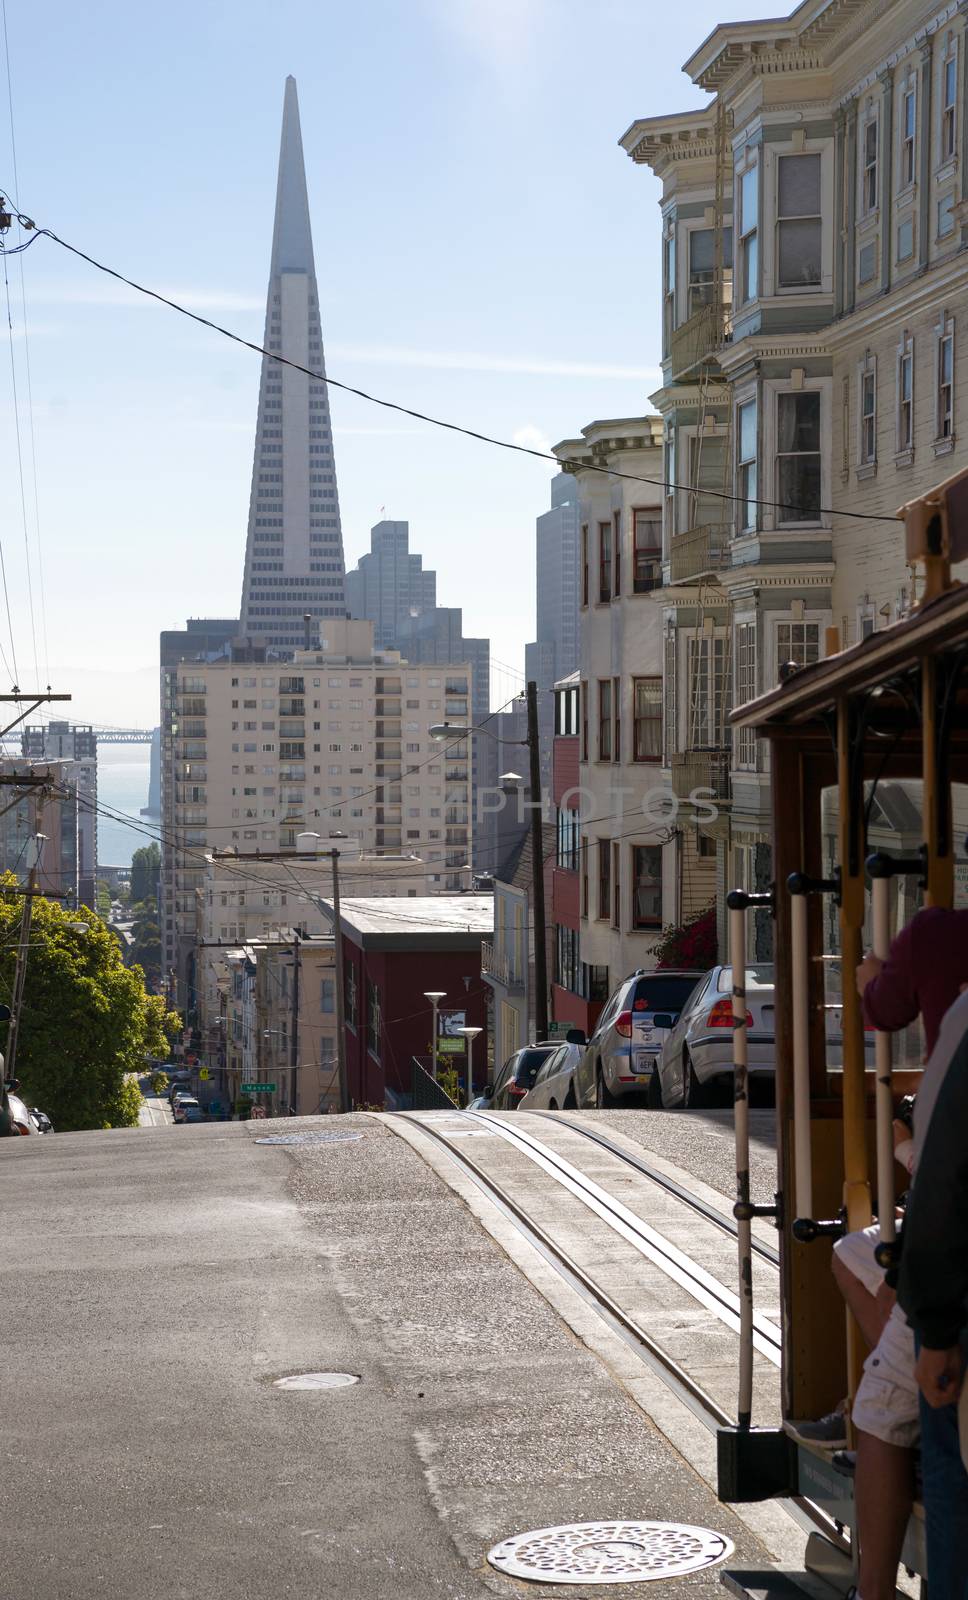 A San Francisco Trolly moves people along with Trans America Tower in the background